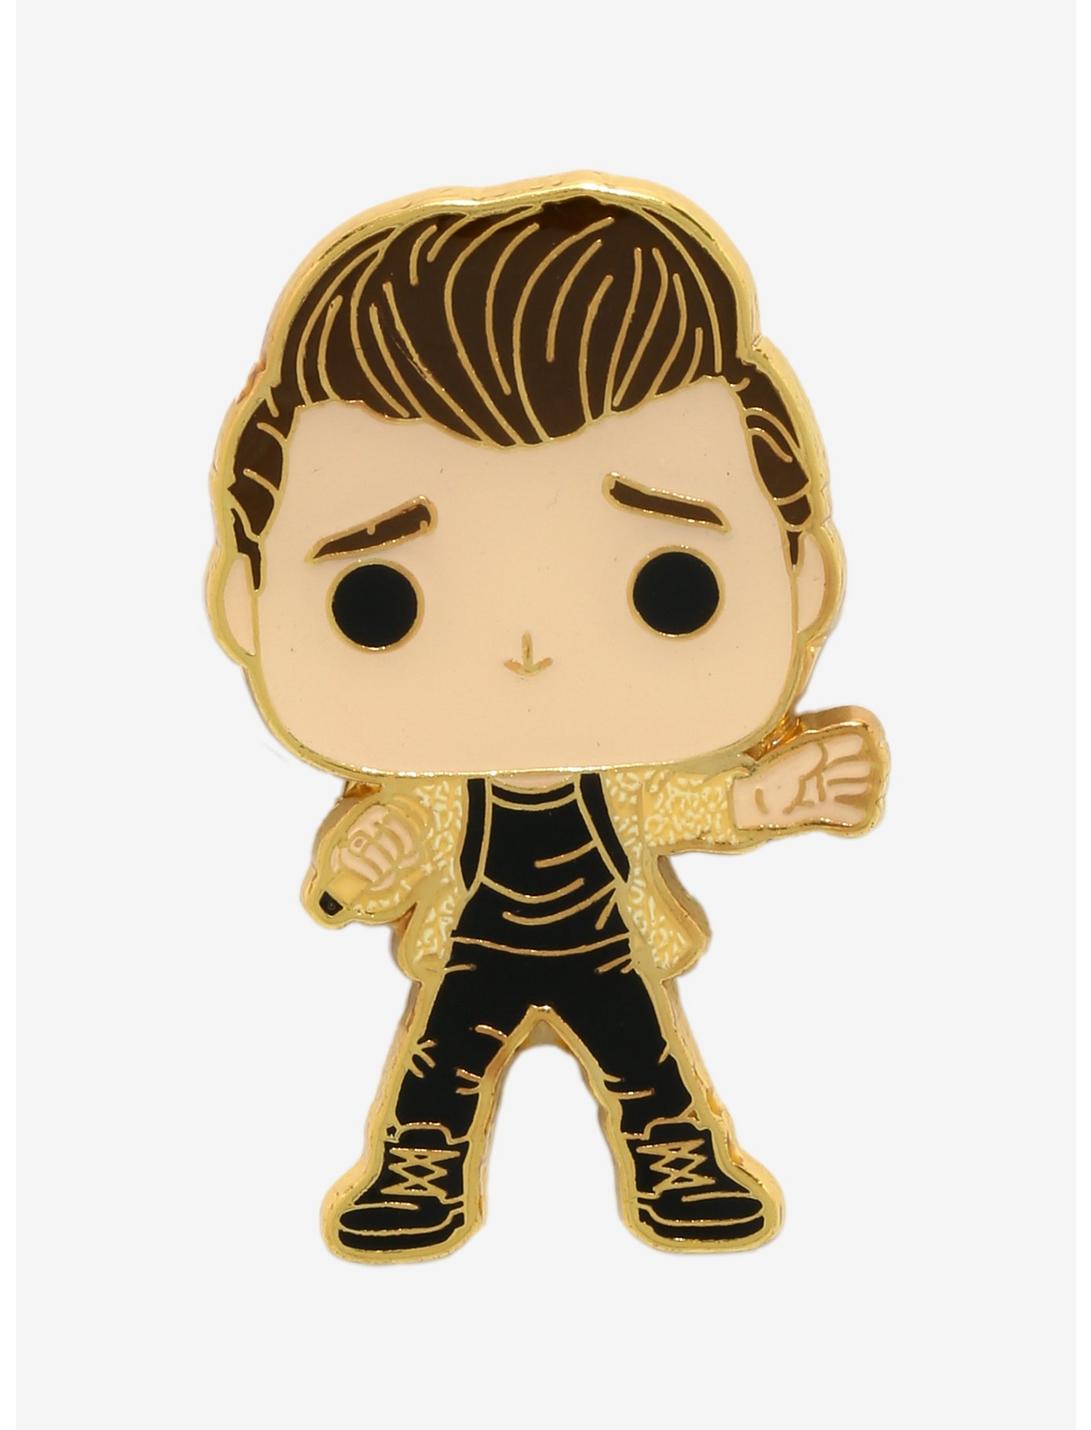 Funko Panic! At The Disco Pop! Brendon Urie Enamel Pin Hot Topic Exclusive, , hi-res